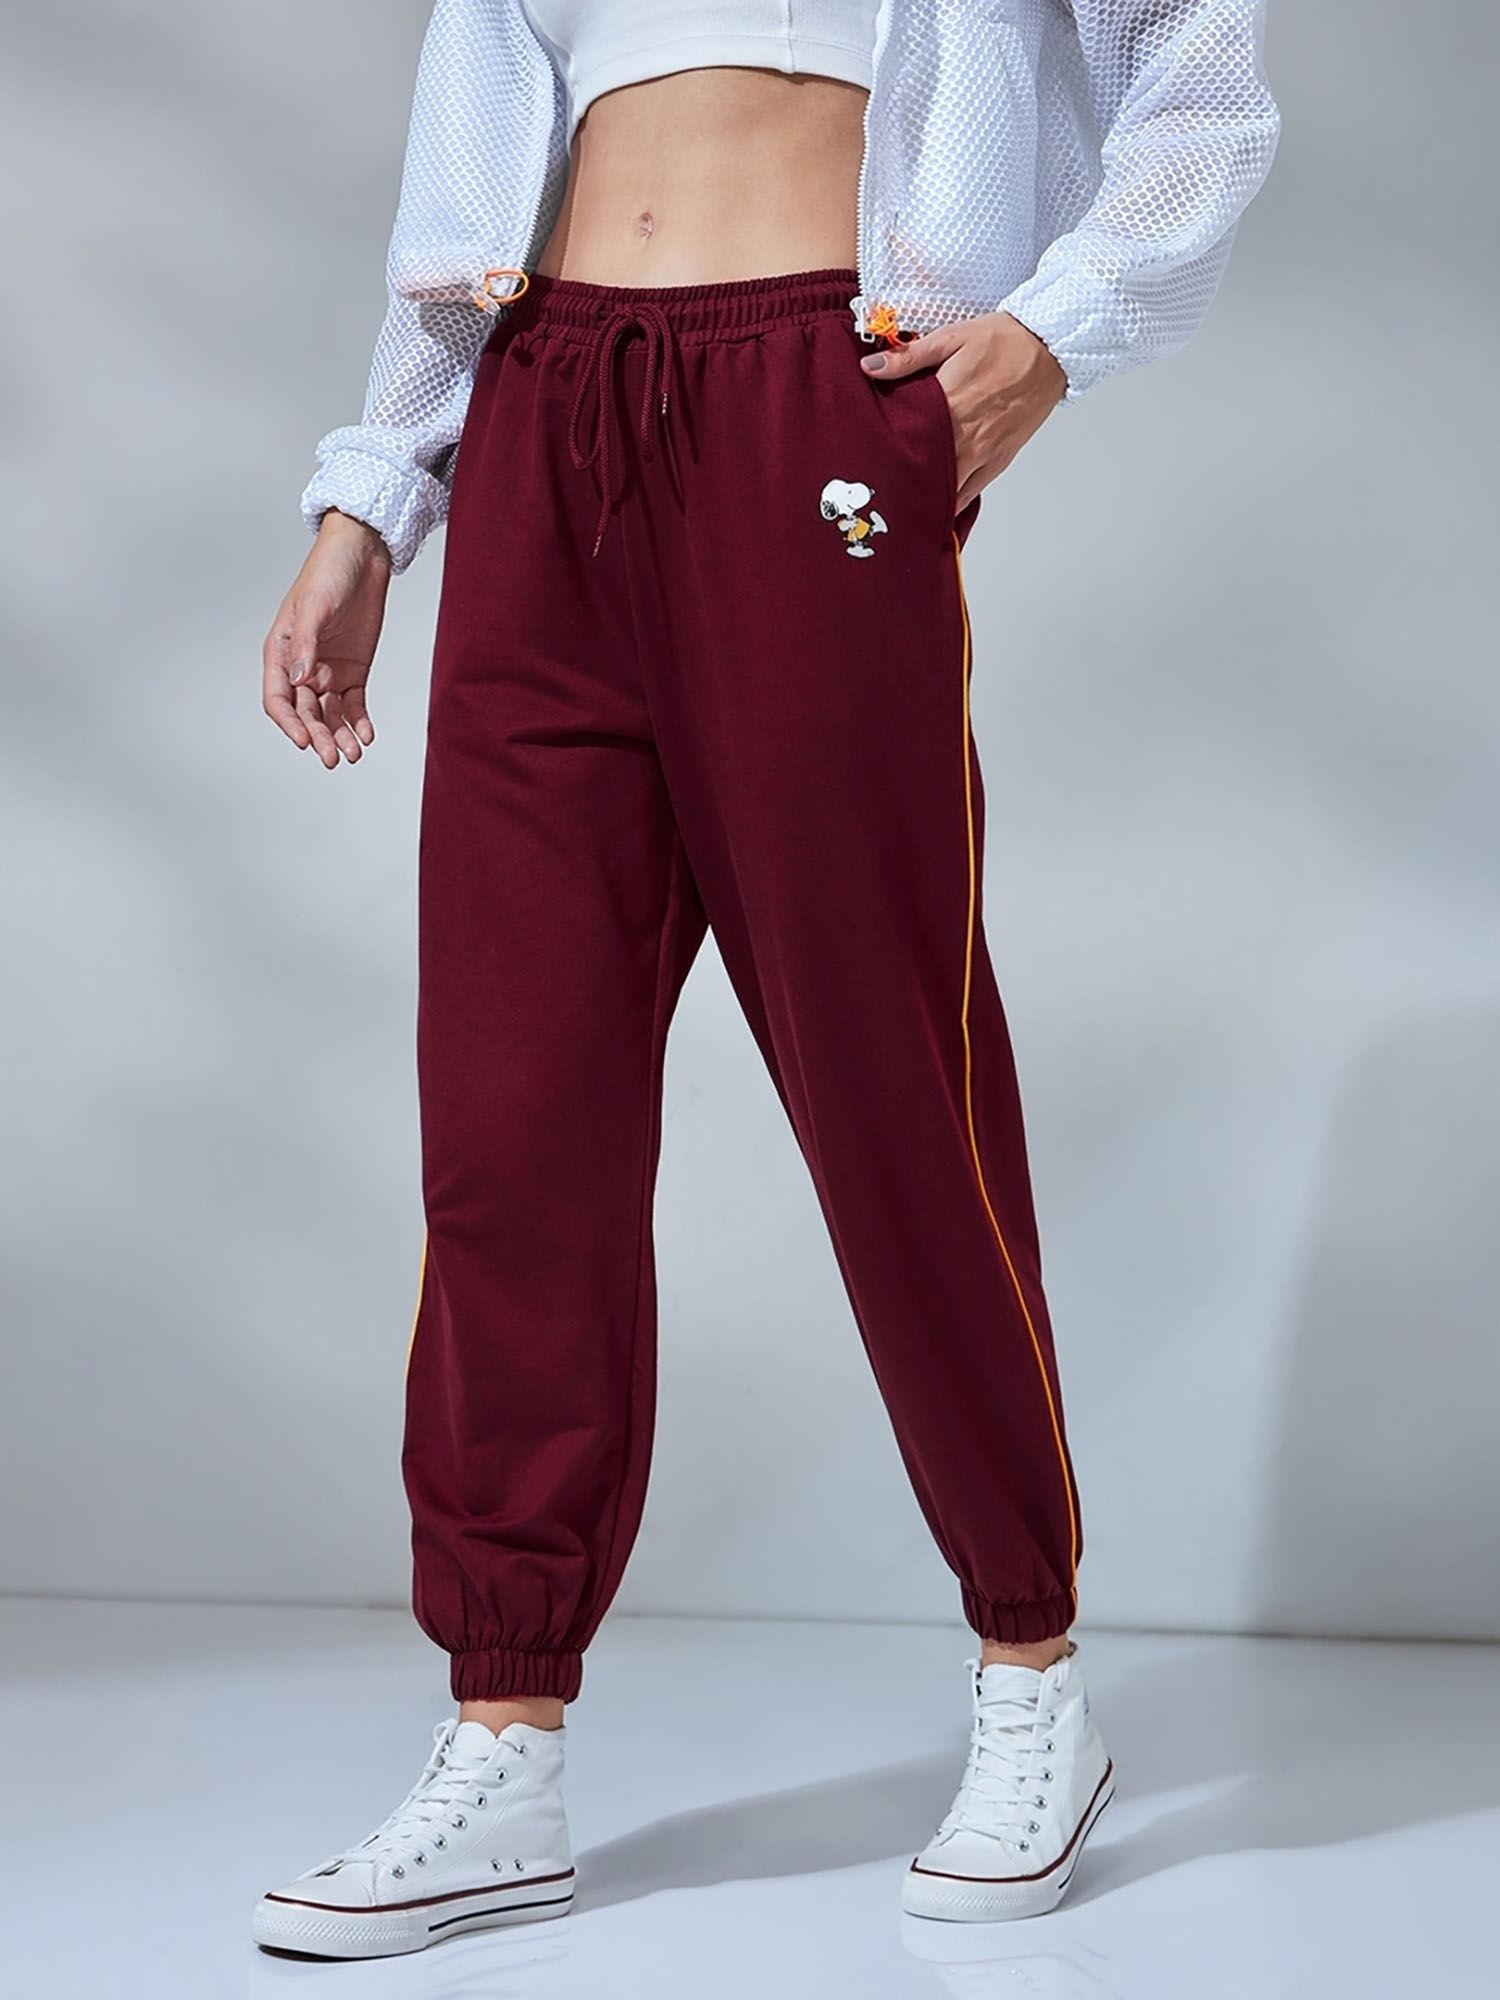 official peanuts merchandise womens maroon printed oversized joggers